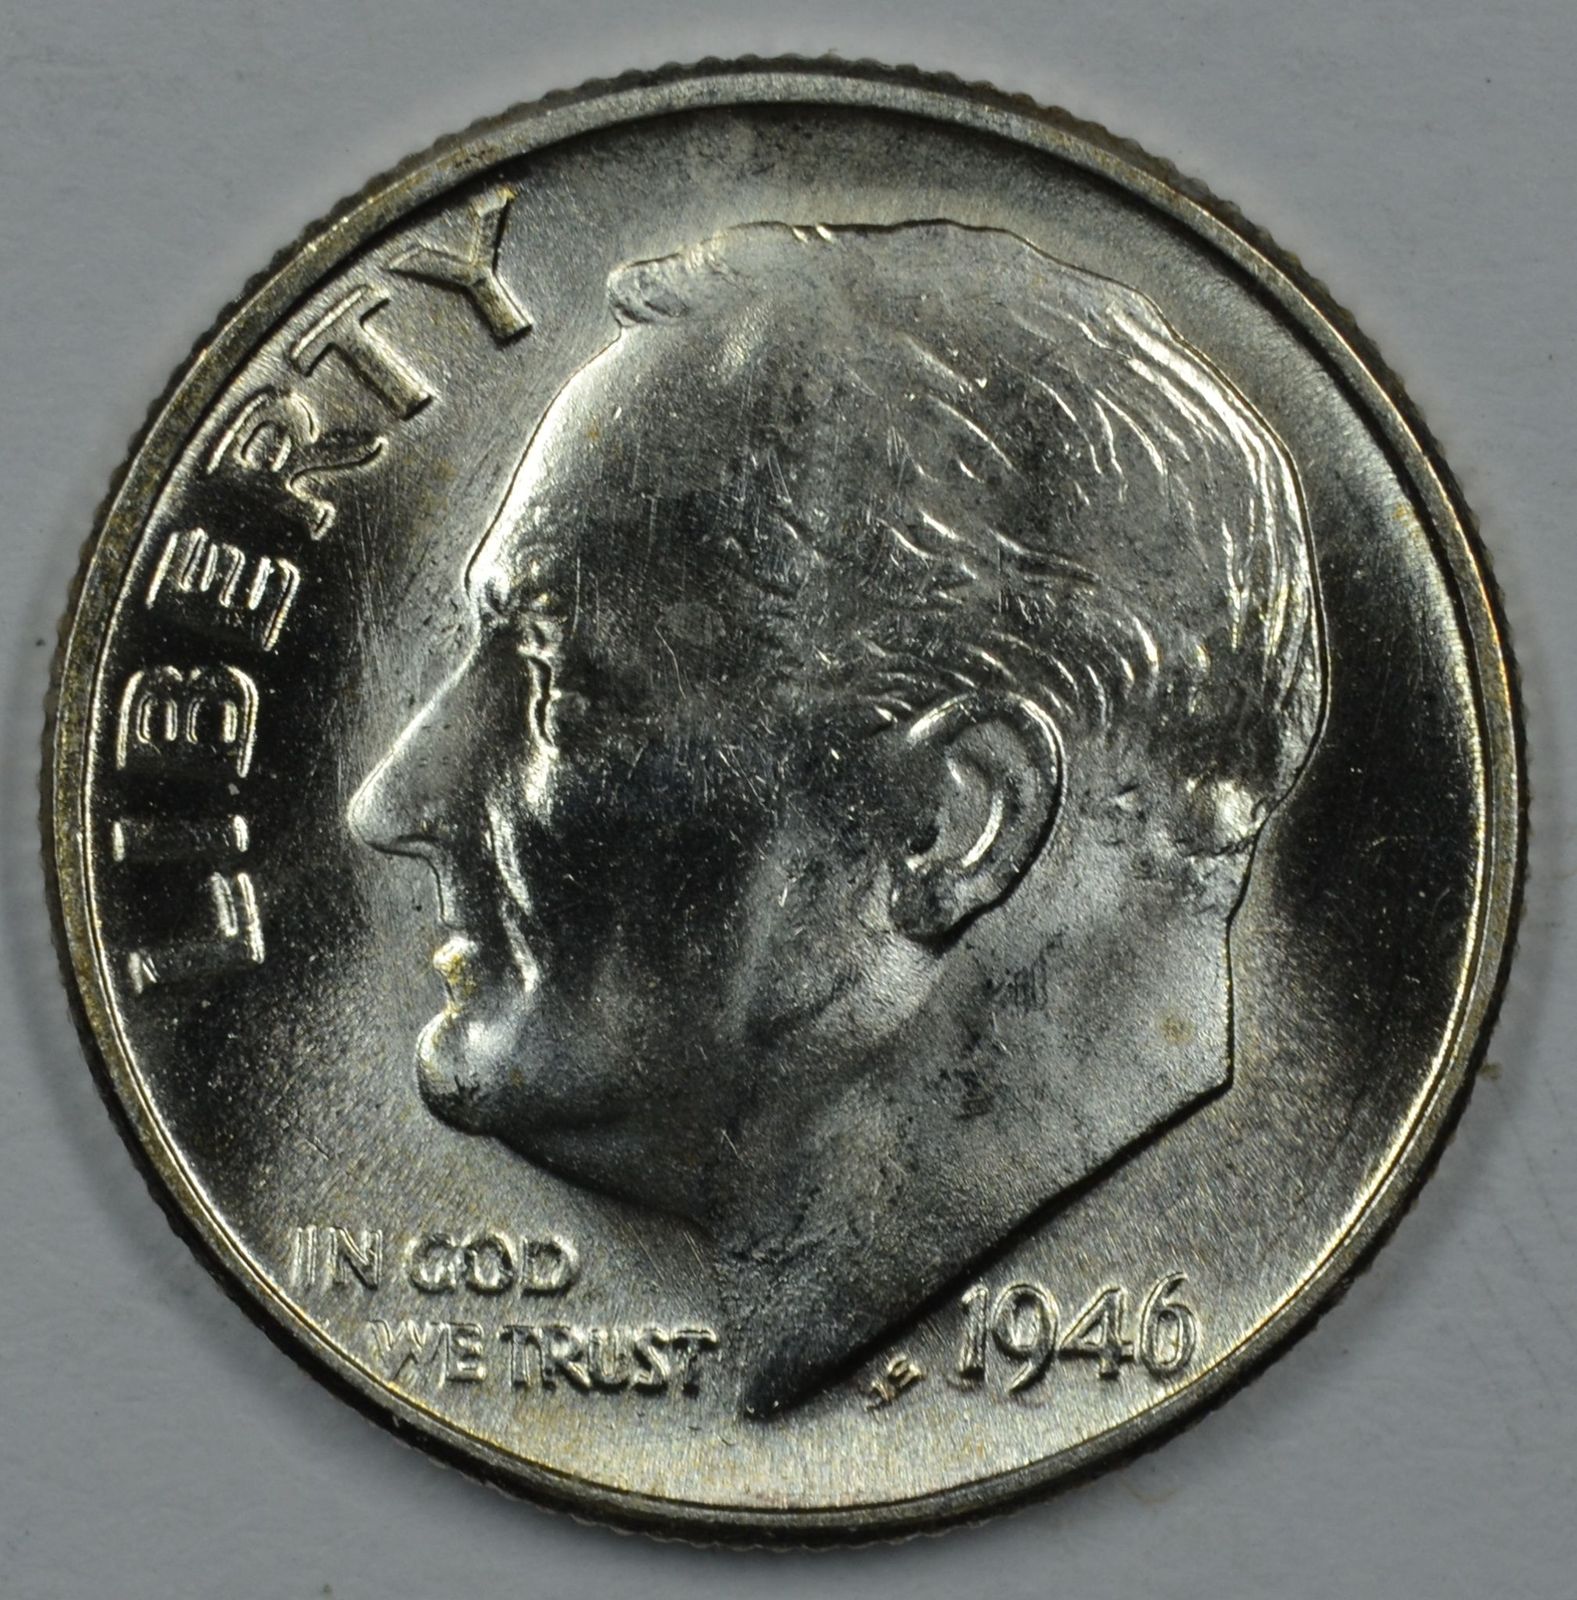 Primary image for 1946 P Roosevelt uncirculated silver dime BU